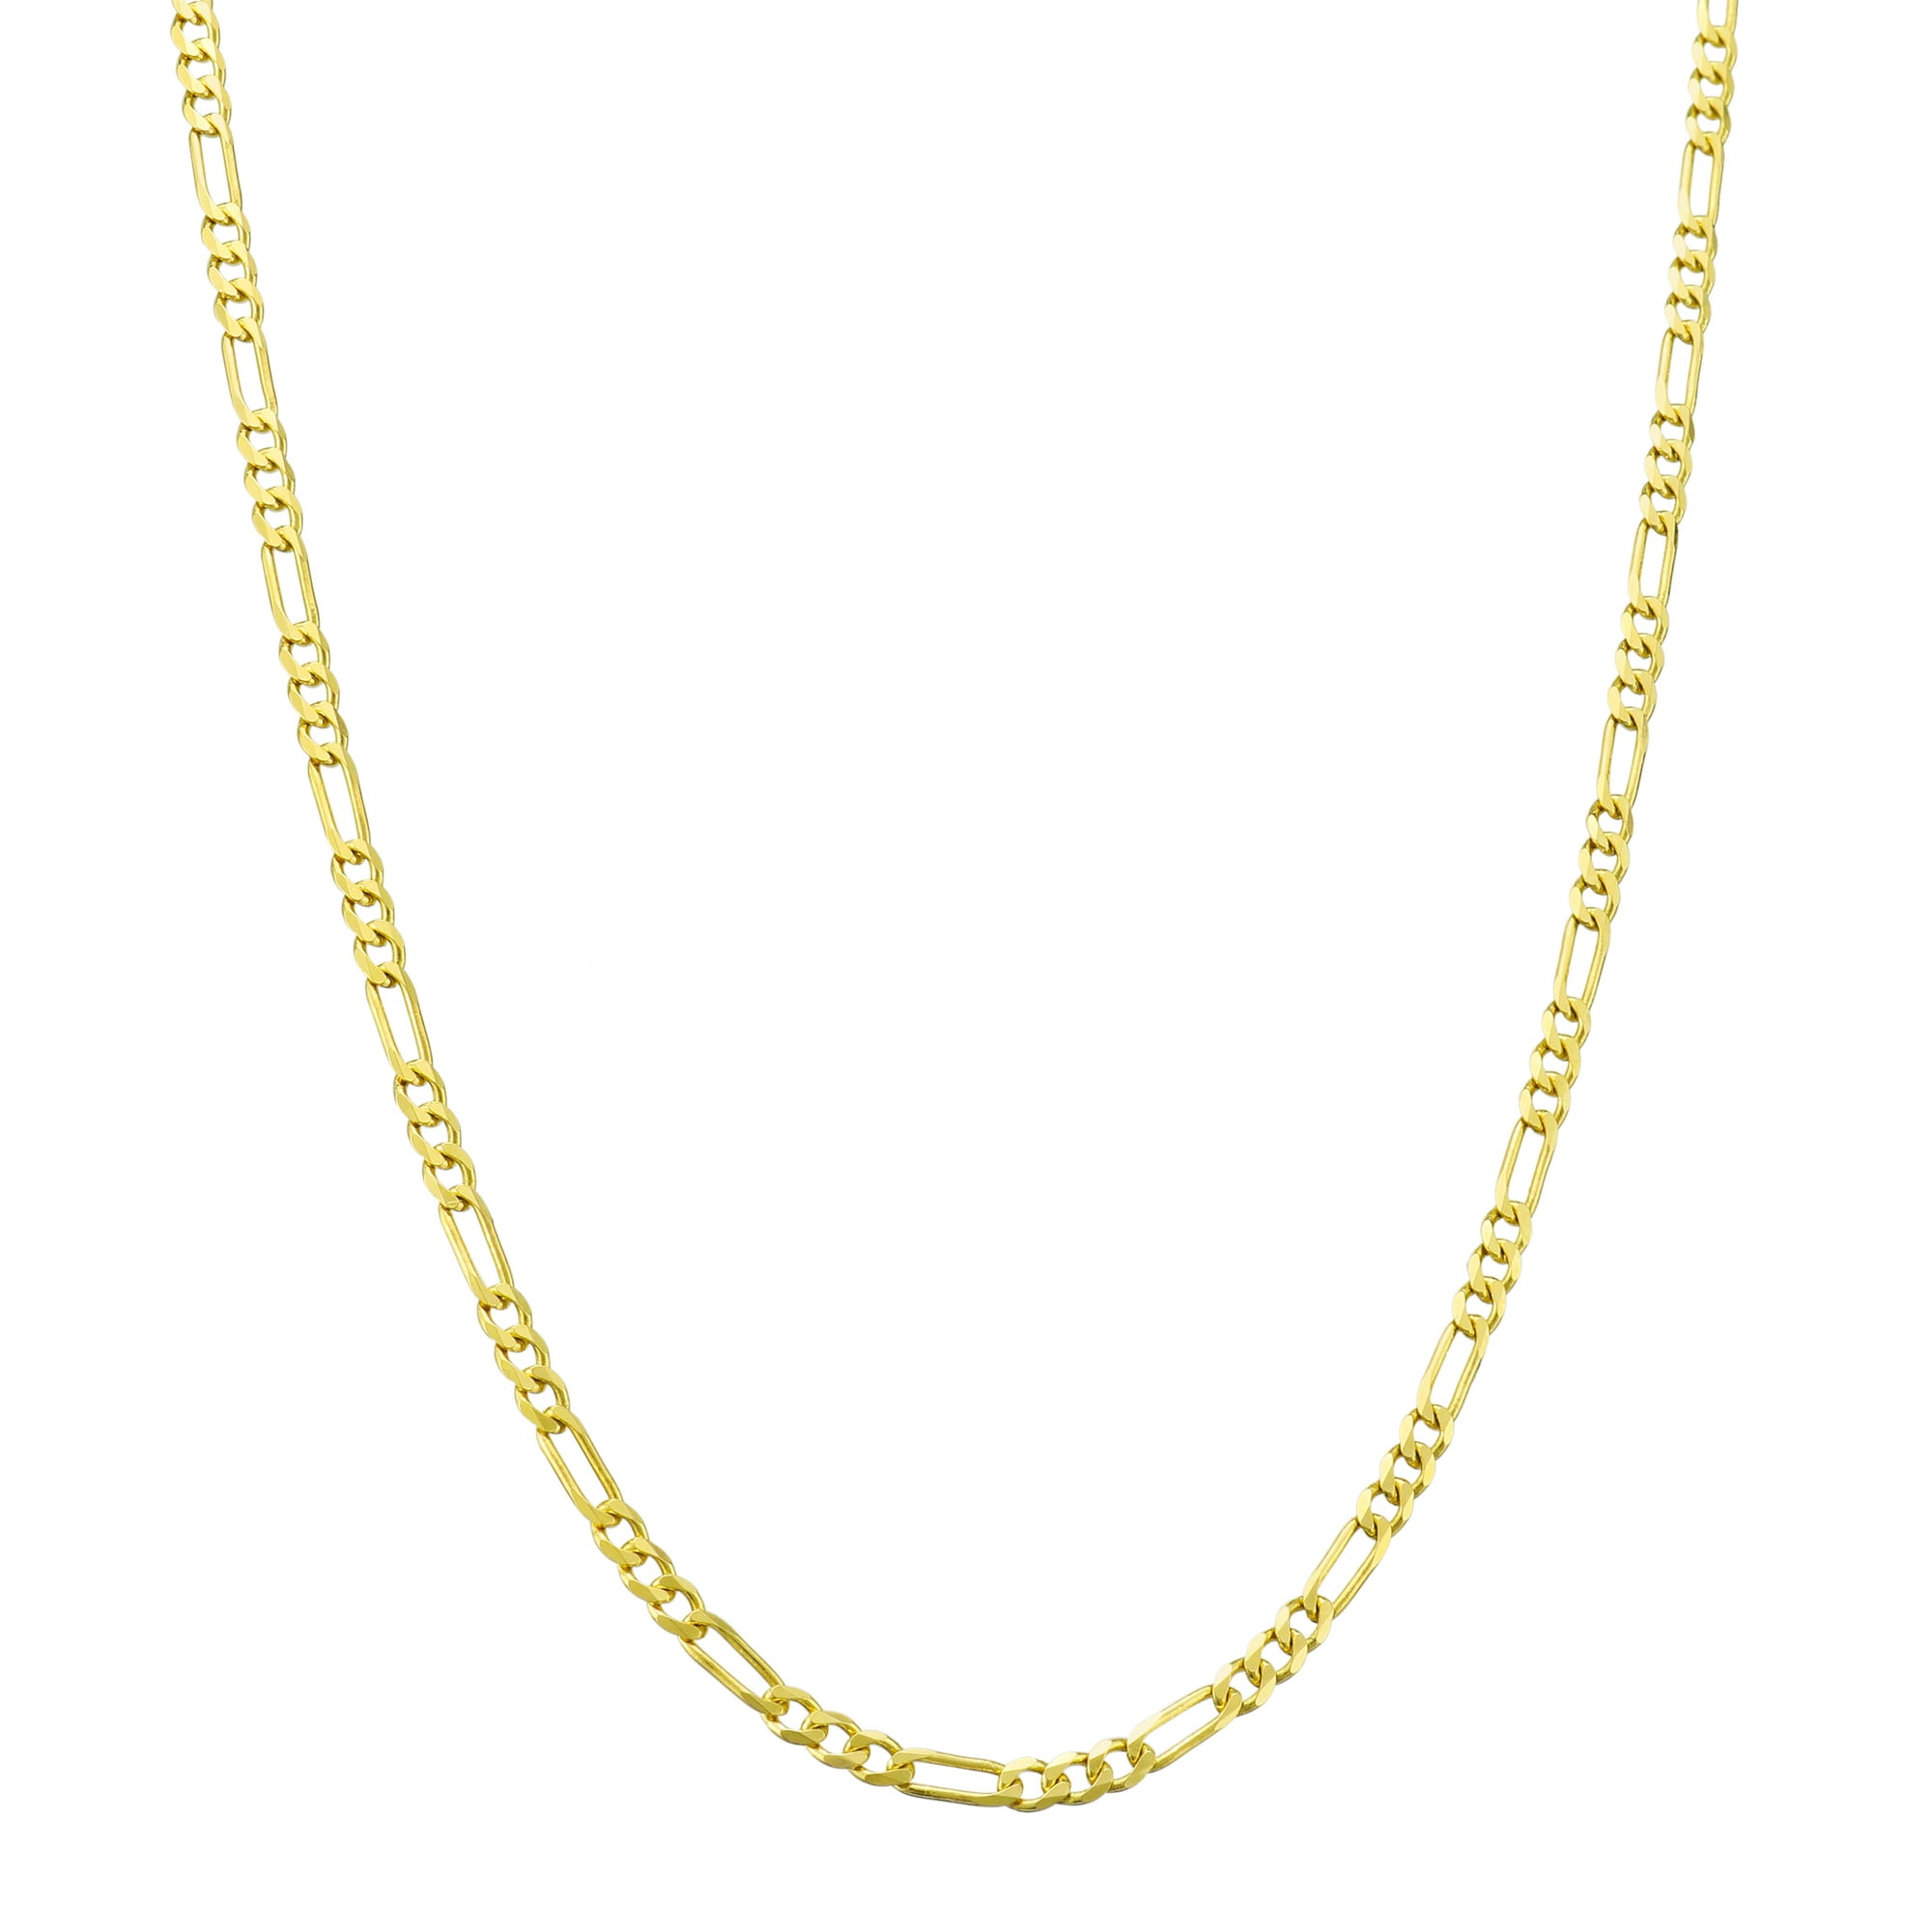 Nuragold 10k Yellow Gold 2mm Figaro Chain Link Pendant Necklace